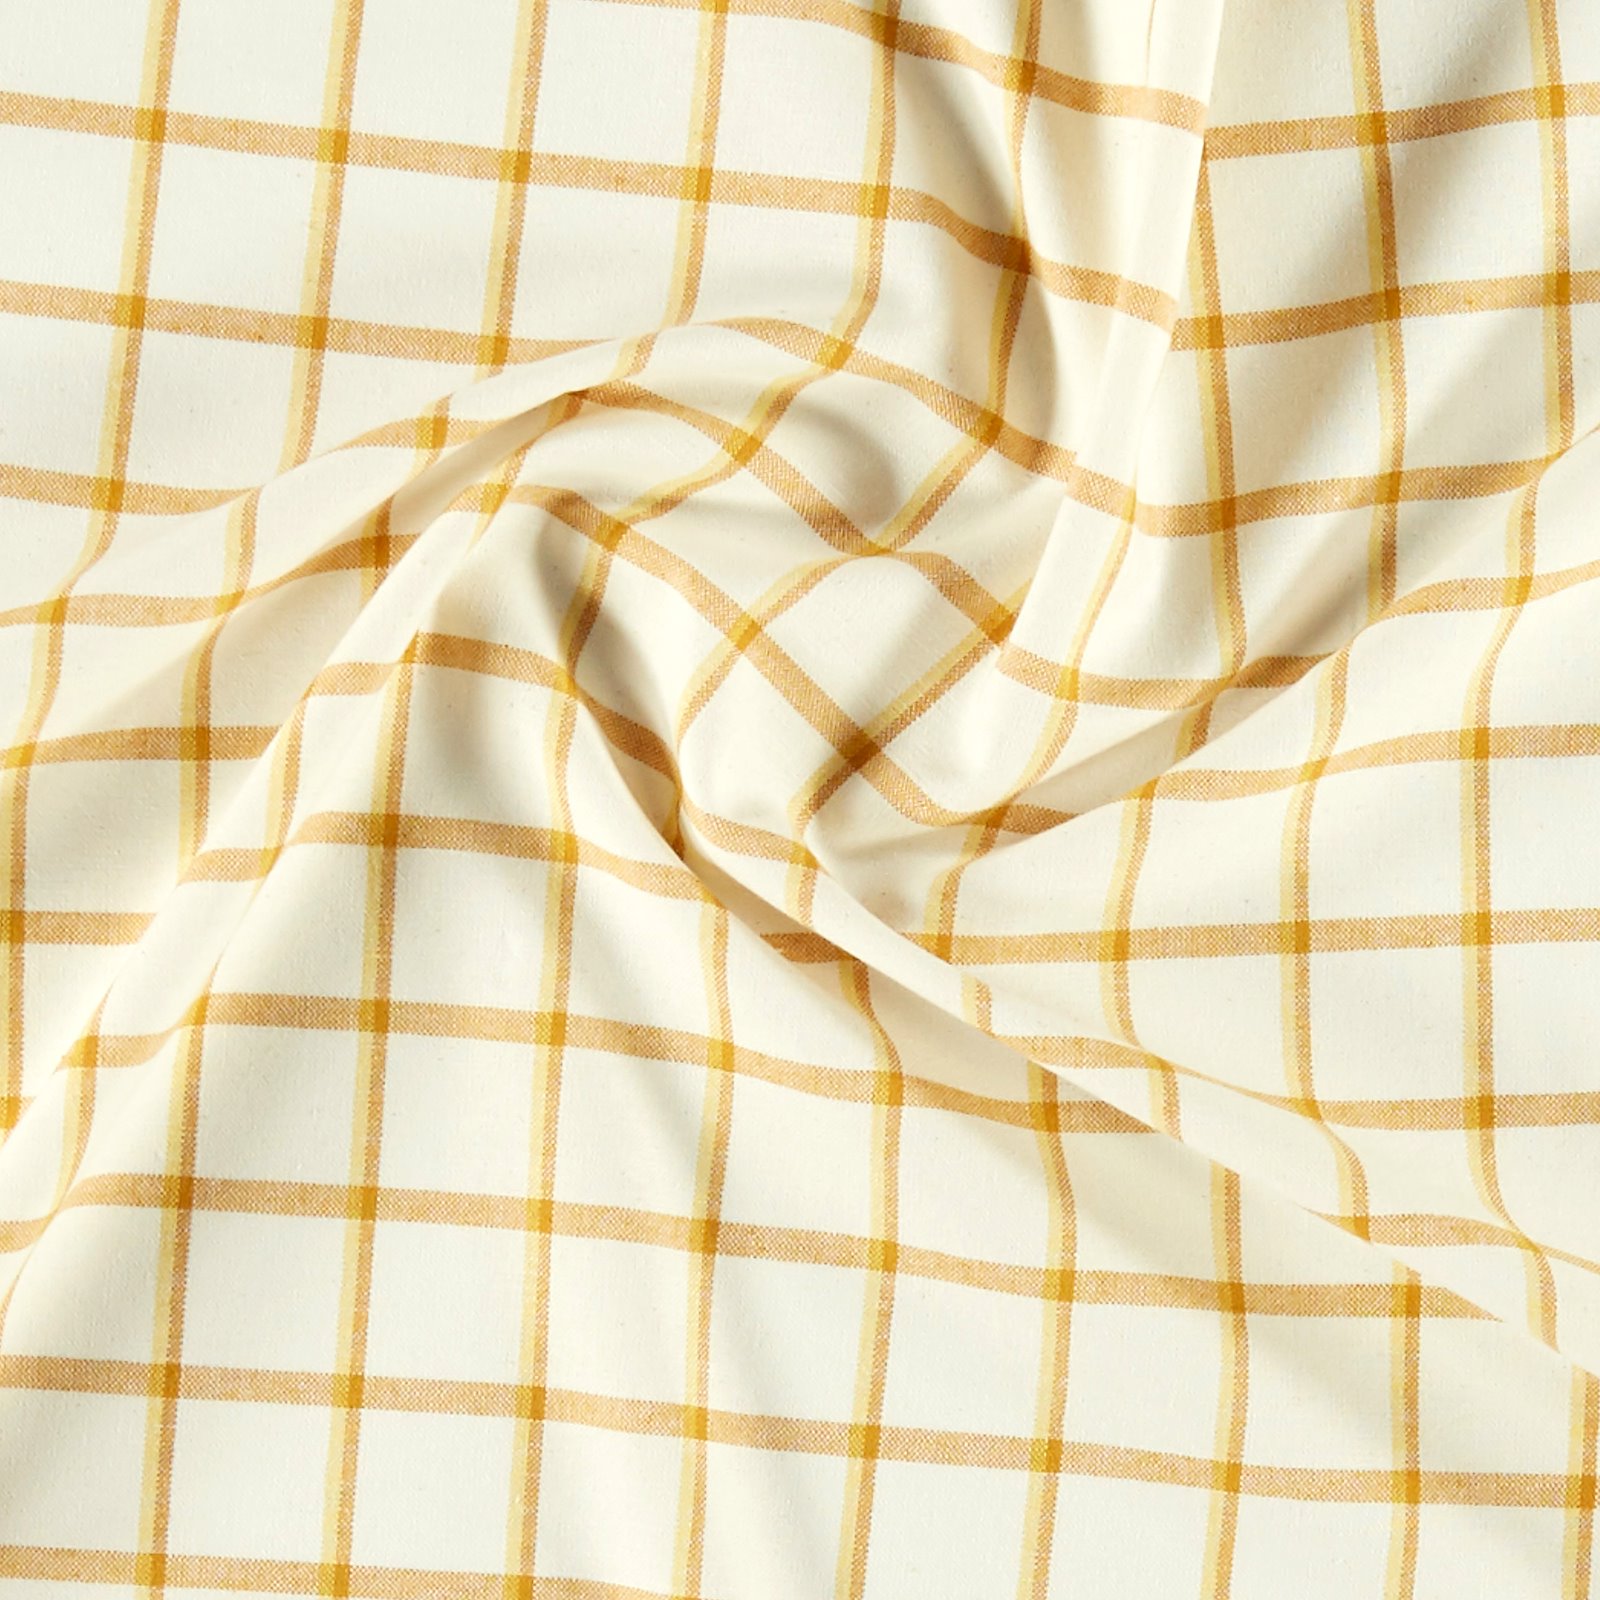 Woven cotton offwhite/yellow YD check 816303_pack